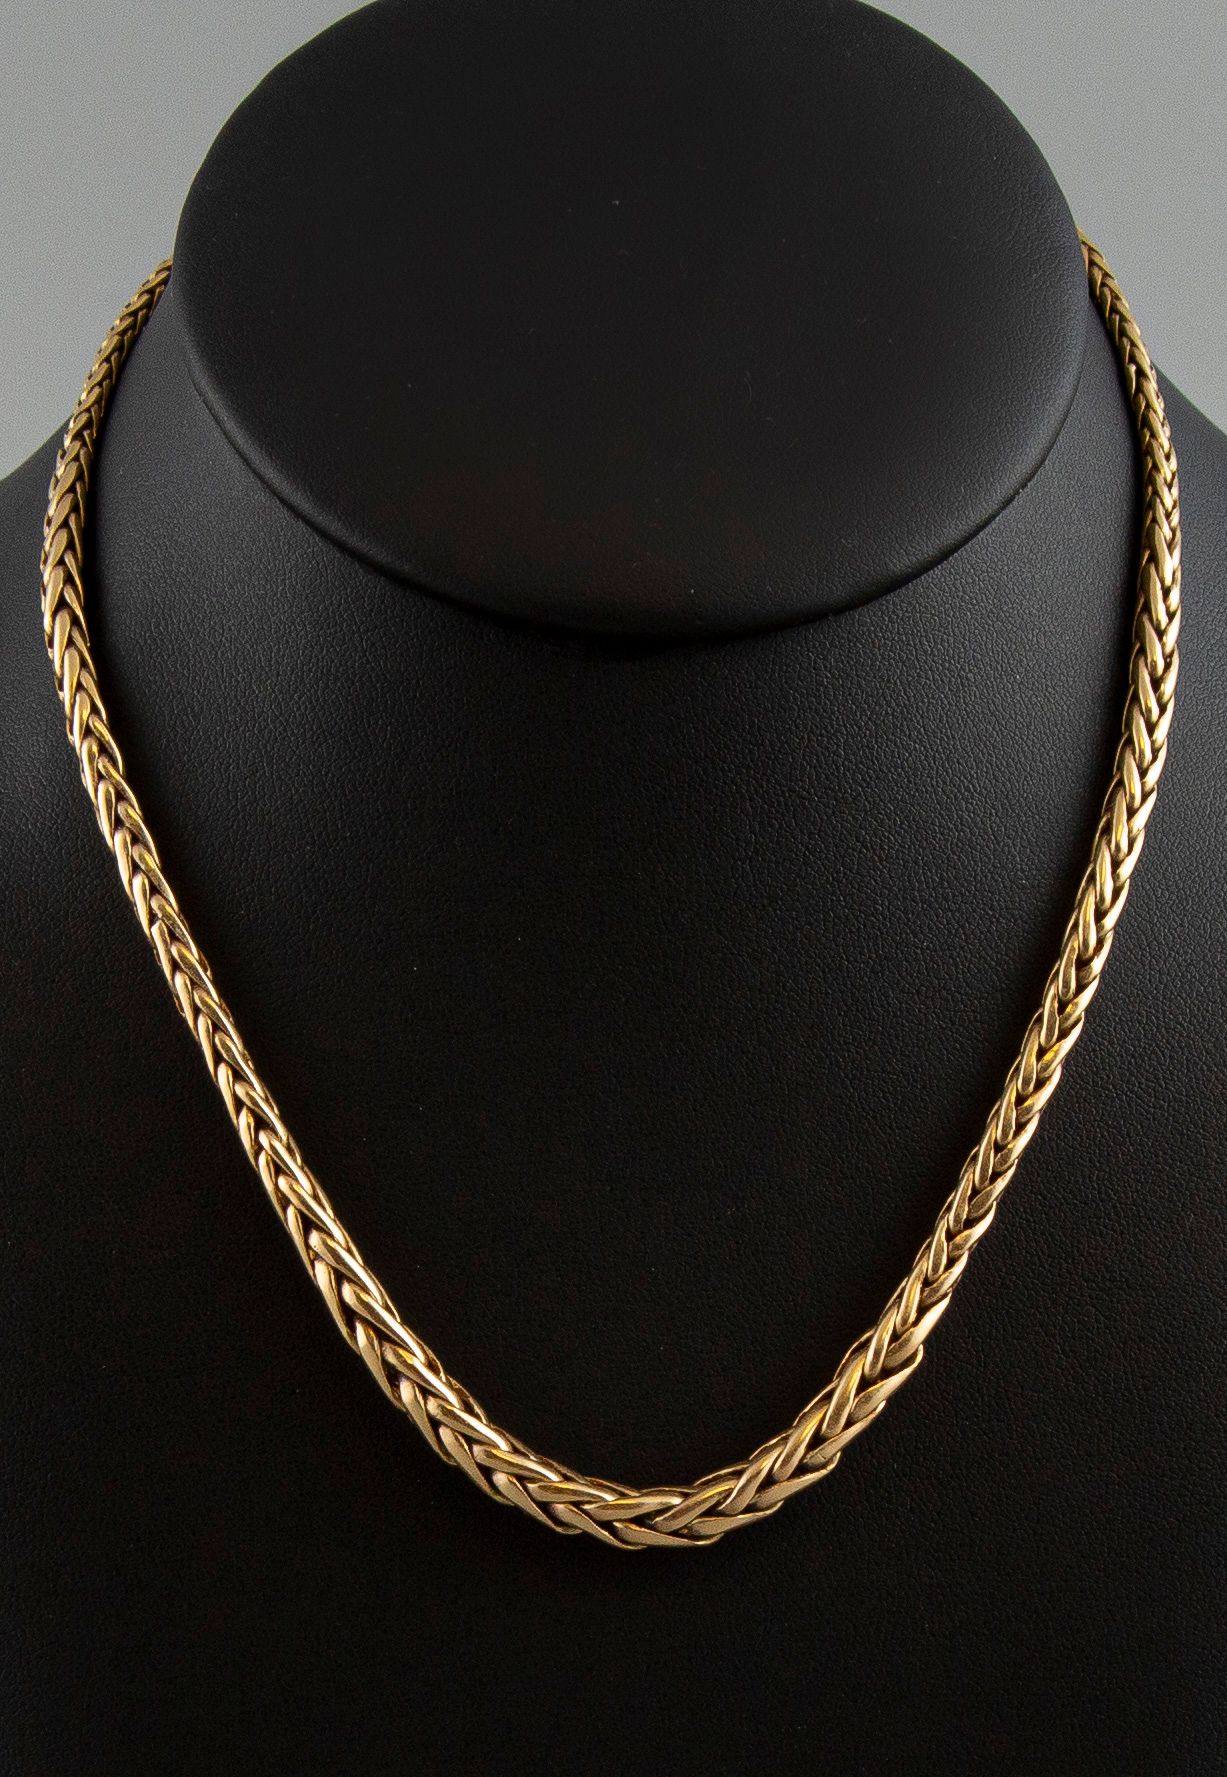 Null Yellow gold necklace 18K 750°, palm tree link. Weight 41,2g.